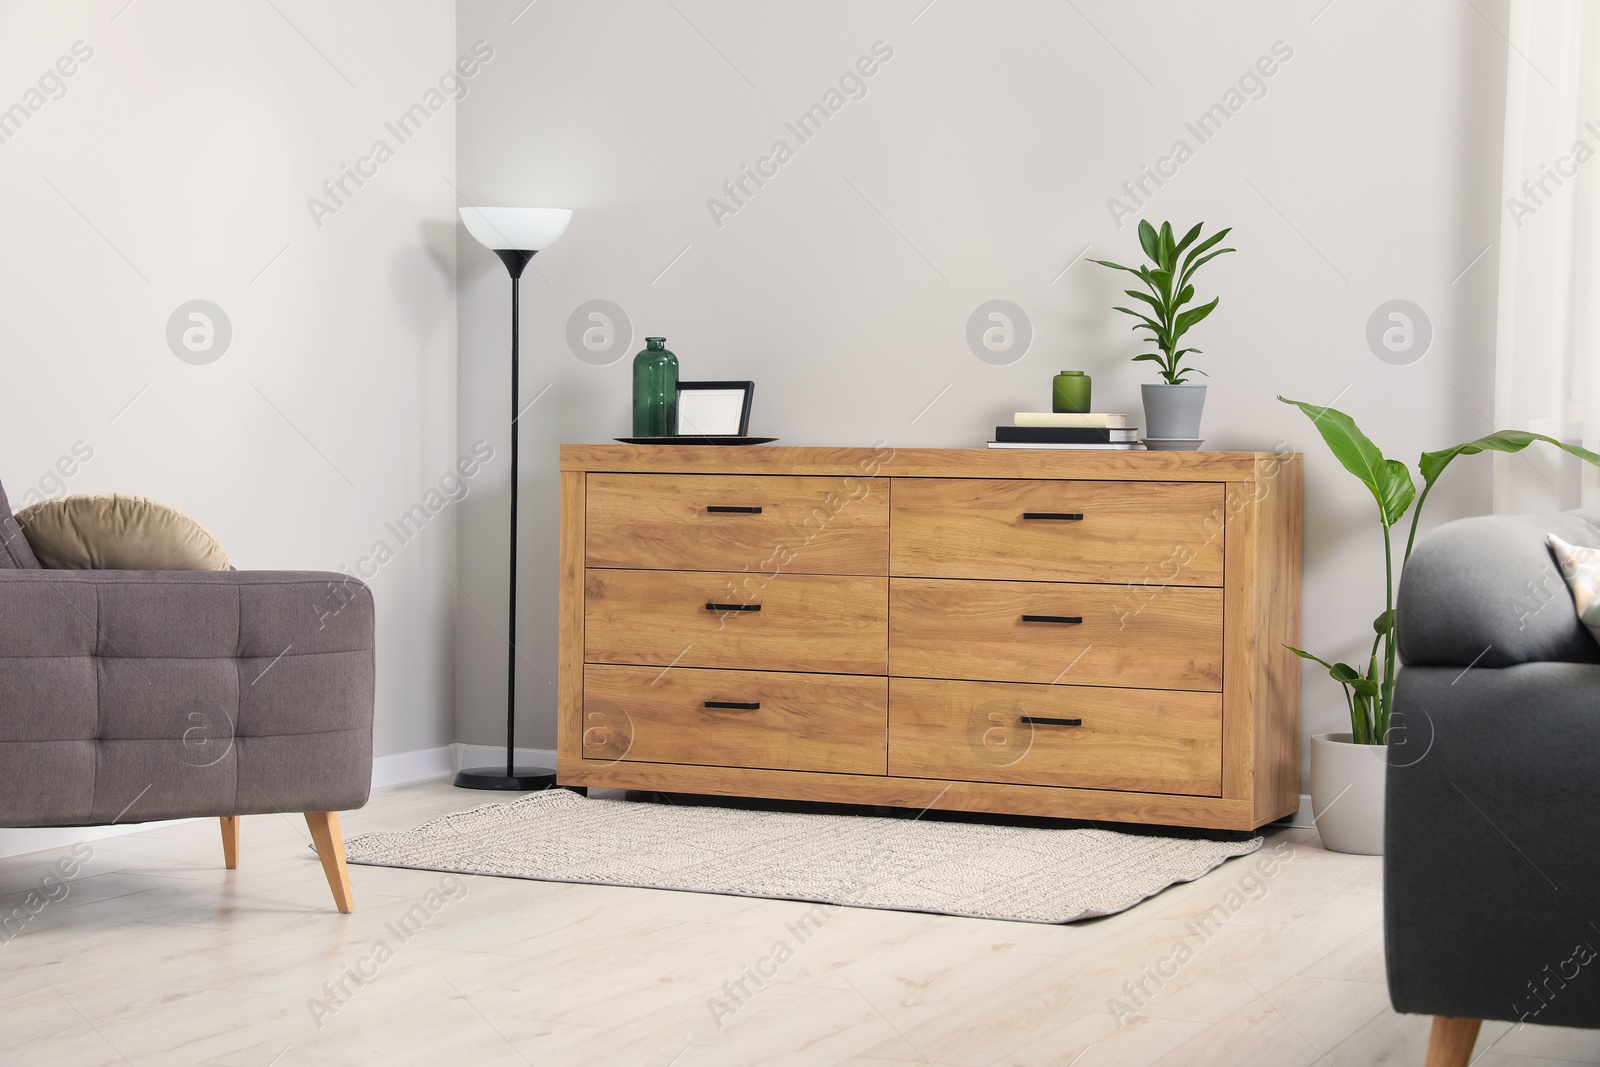 Photo of Cozy room interior with chest of drawers, mirrors and decor elements